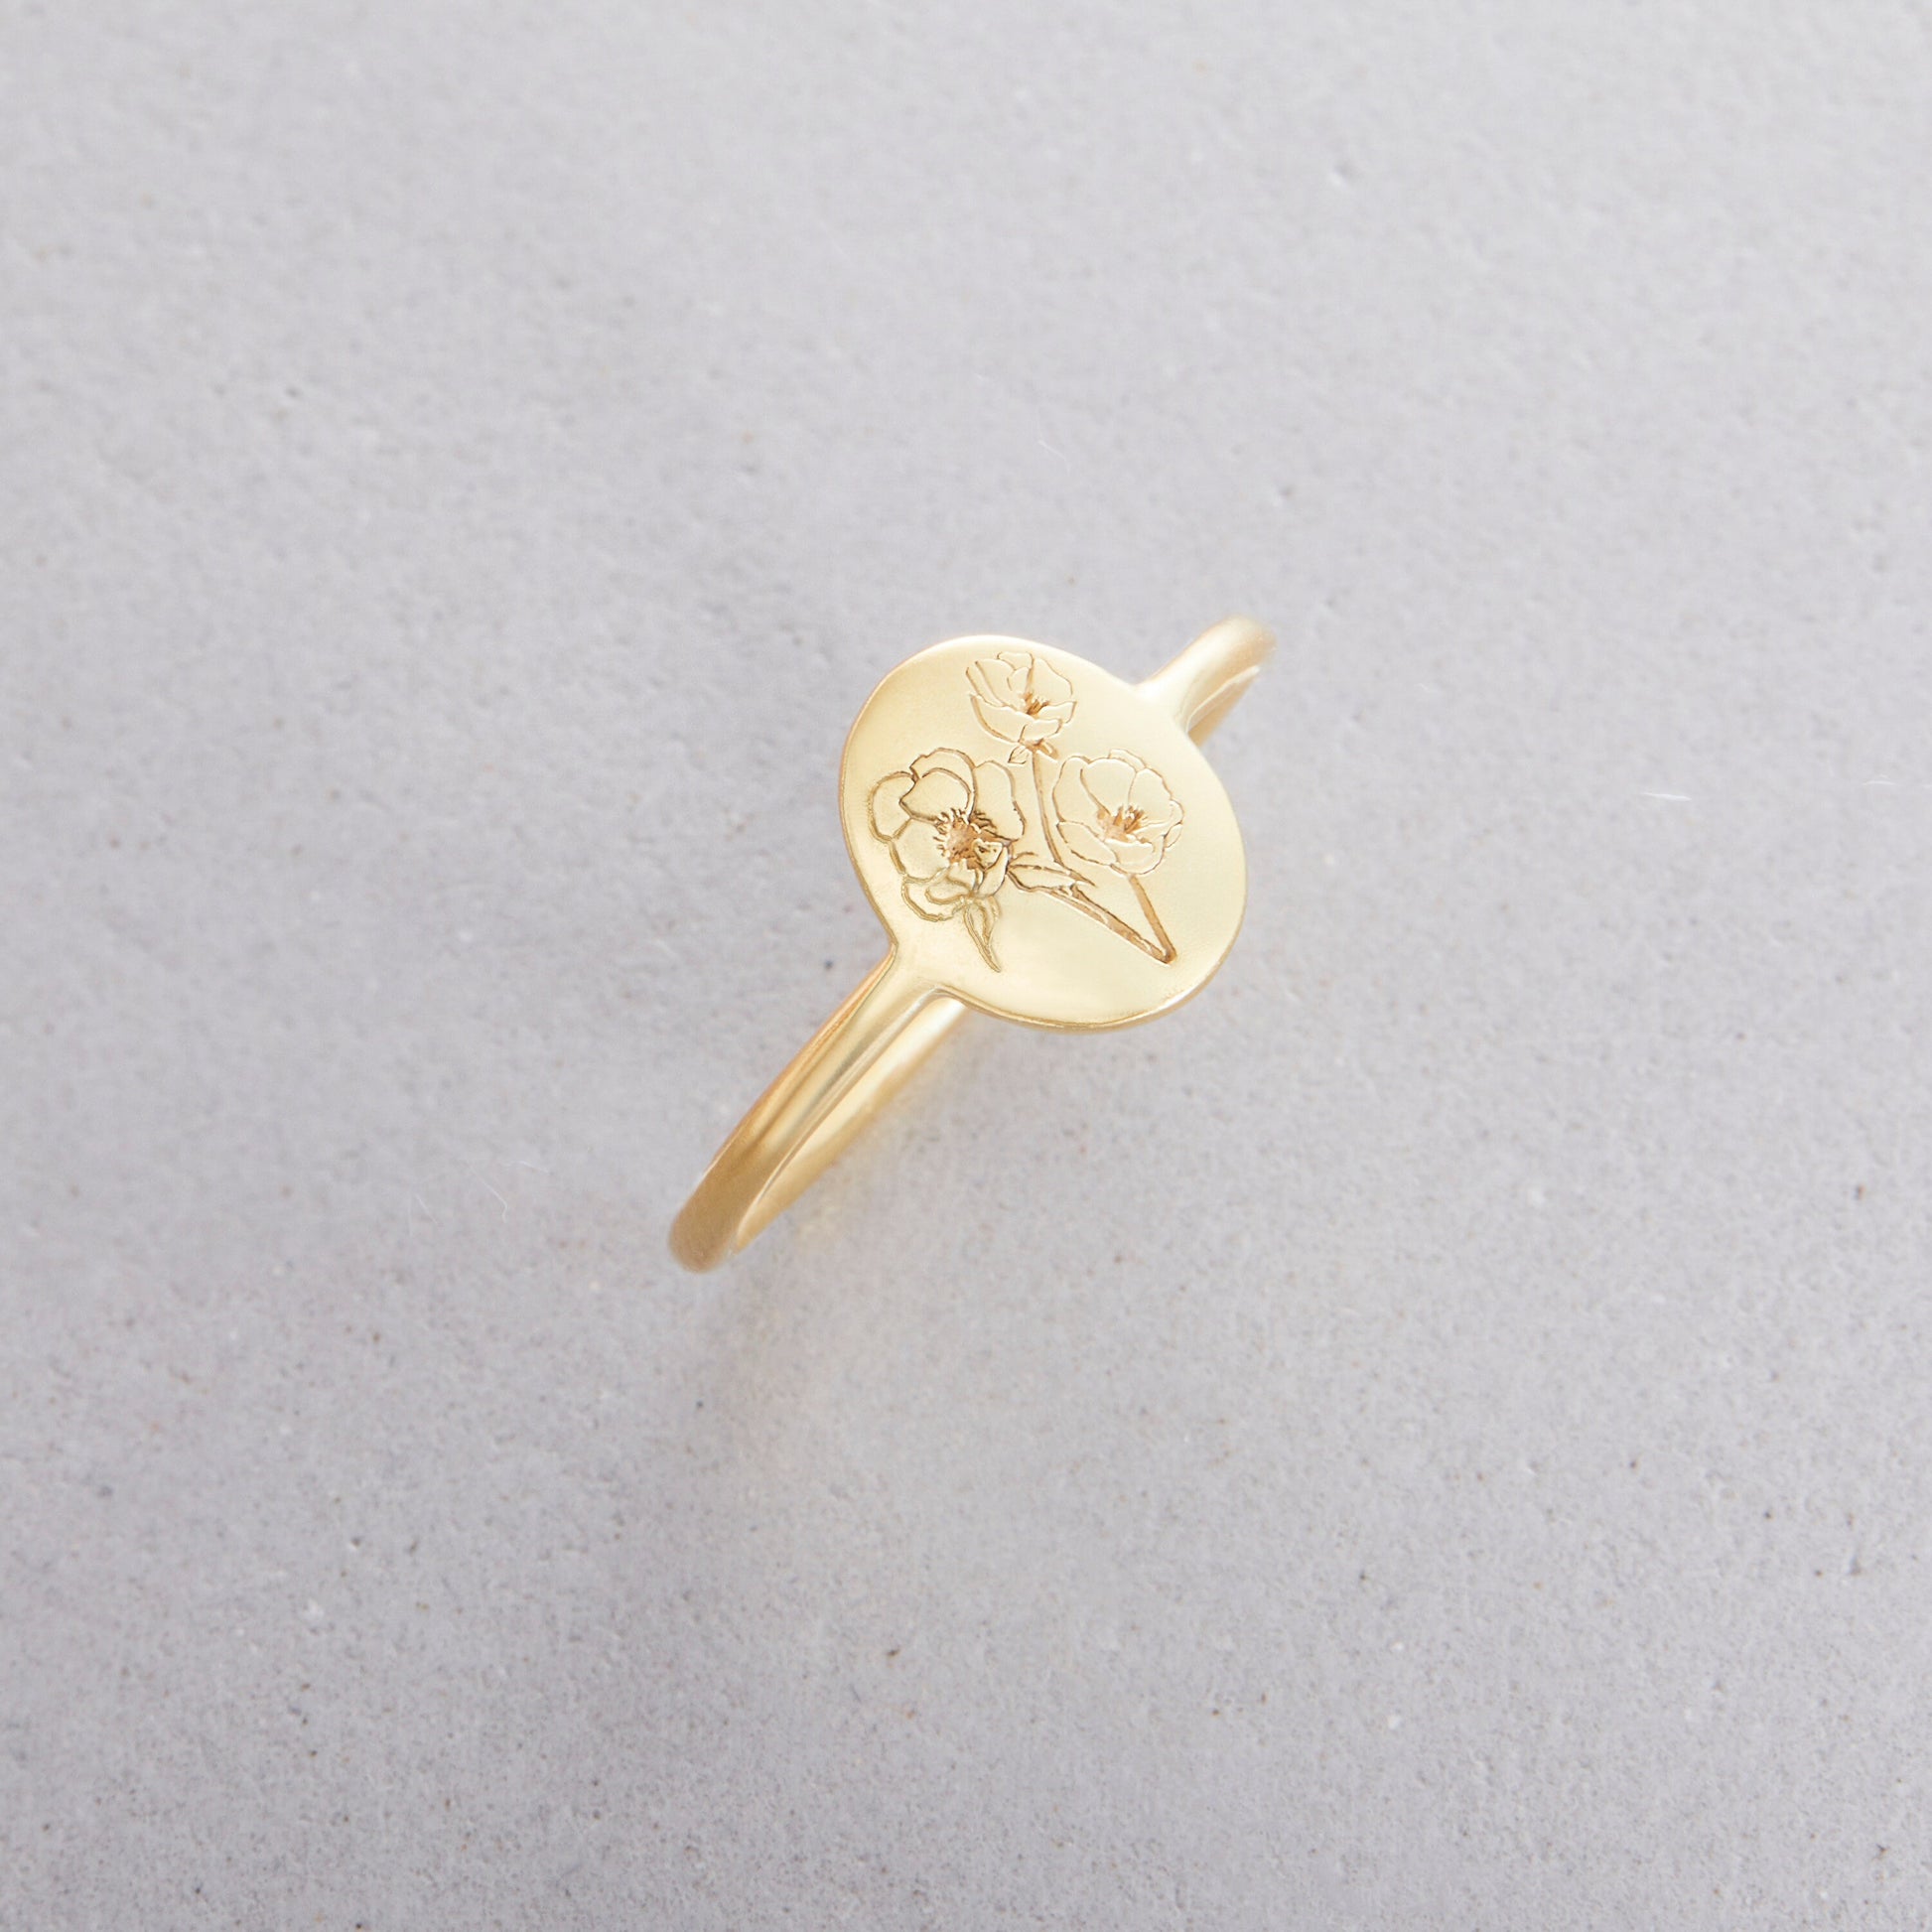 Personalized Birth Flower Ring | Custom Dainty Ring | Everyday Statement Ring | Stacking Ring | Minimalist Stacking Ring | Engraved Ring